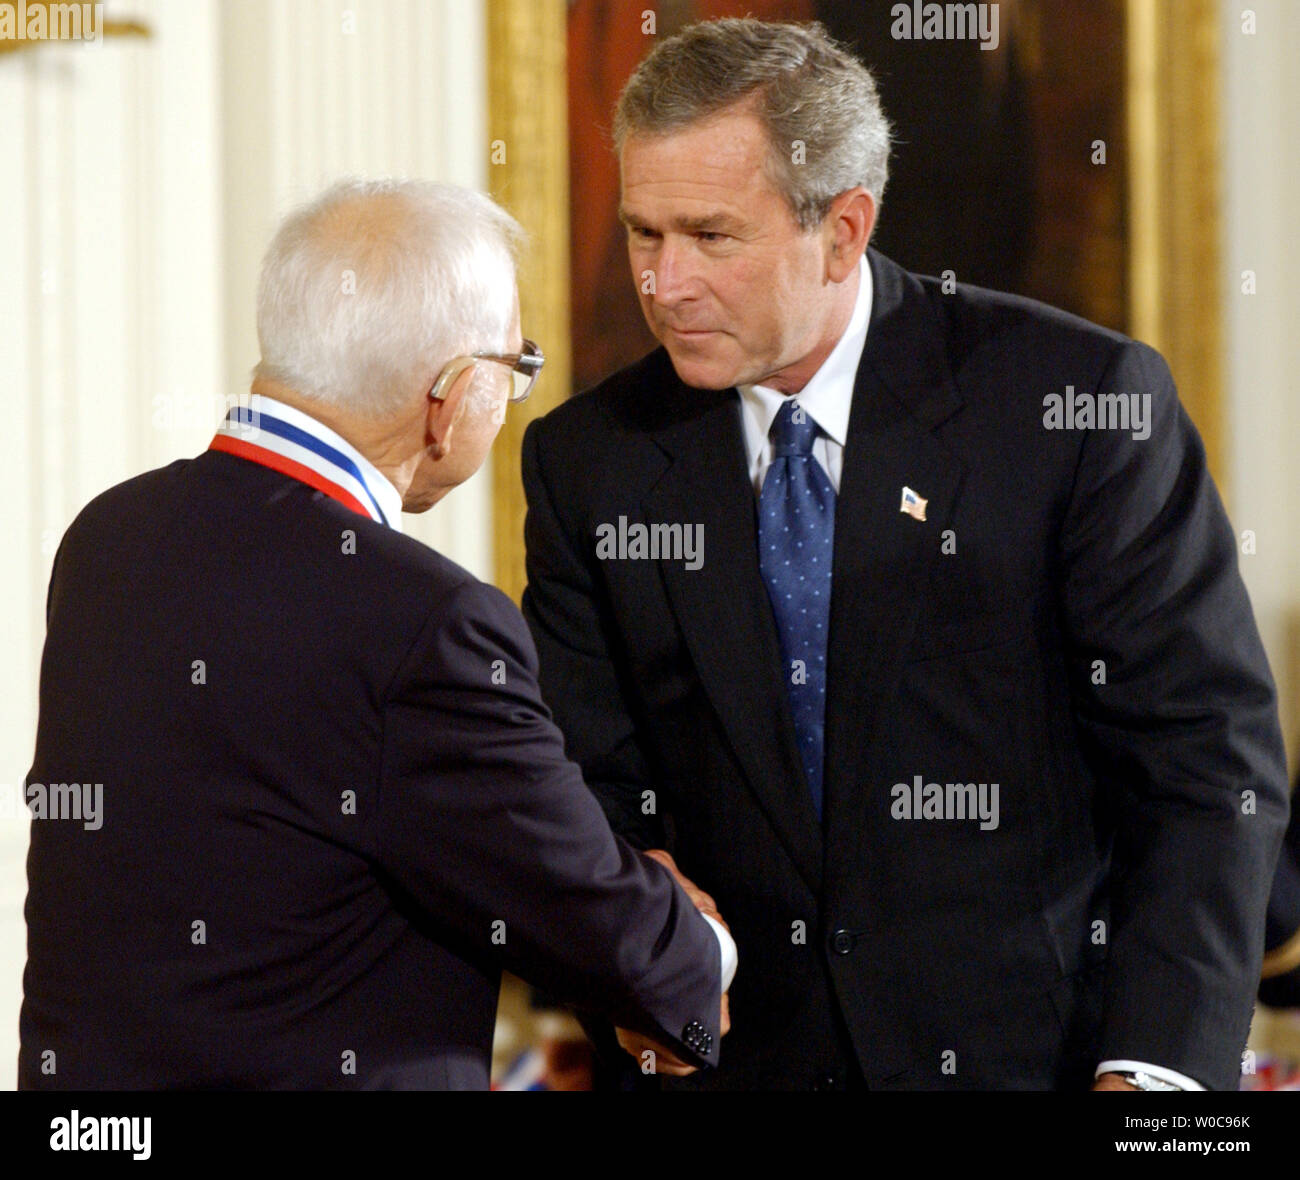 President George W. Bush shakes hands with Leo L. Beranek, 2002 National Medal of Science Laureate for Engineering, during a ceremony in the East Room of the White House on Nov. 6, 2003. Baranek is from BBN Tehcnologies in Cambridge, Mass.  (UPI/Roger L. Wollenberg) Stock Photo